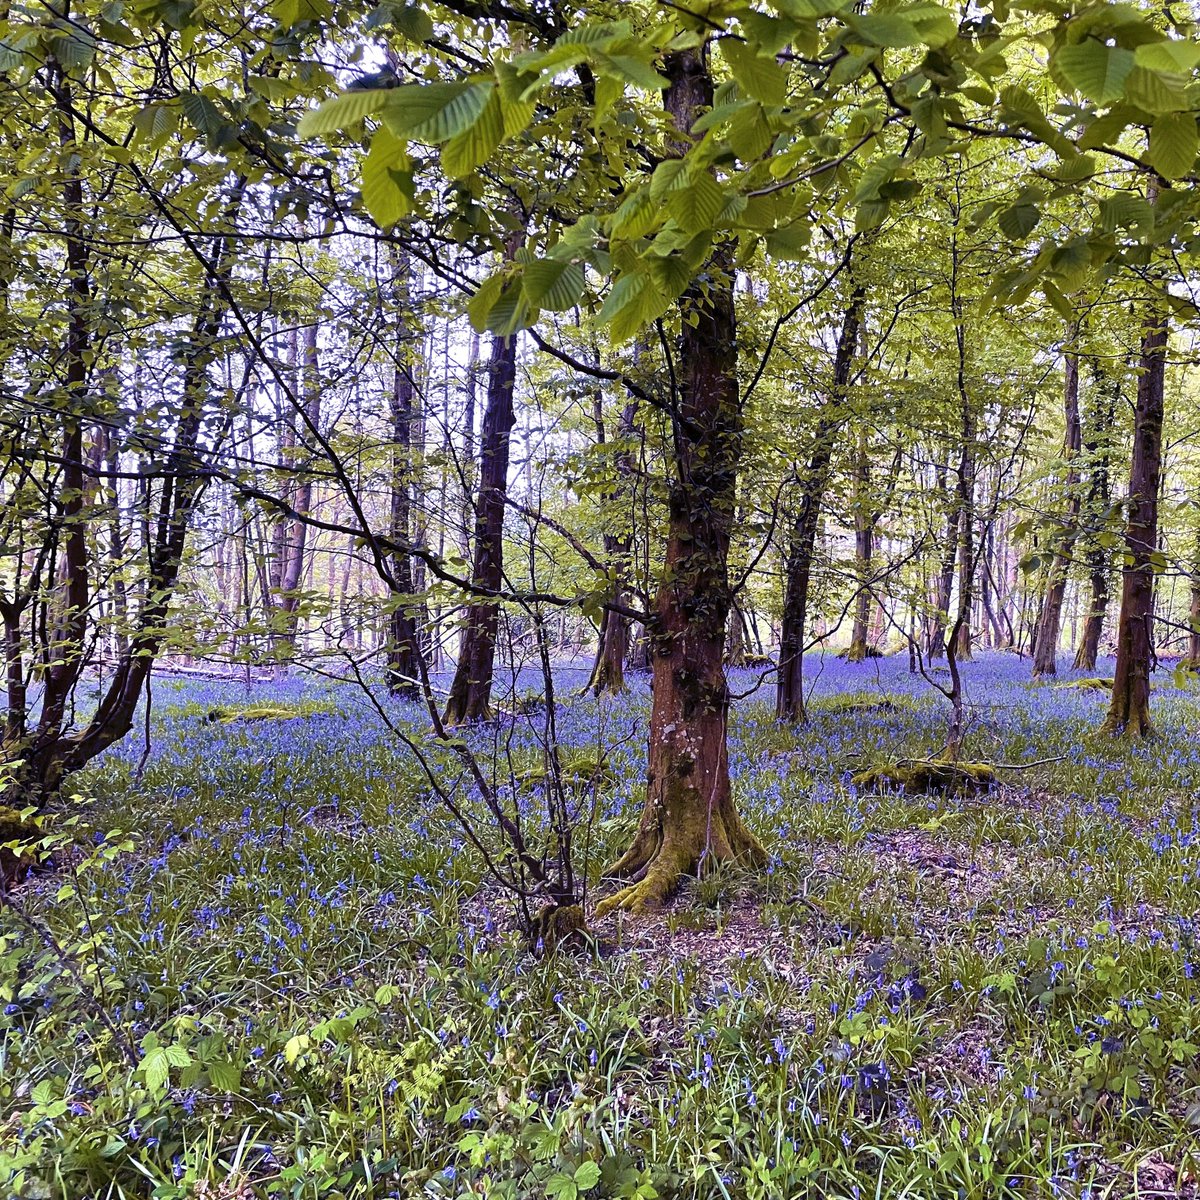 Best places for #bluebells at Bedgebury? Head towards Redwood Avenue, the viewpoint along Dallimore Valley and the Forest Gateway. Explore the woodland edges of the pinetum or Conifer Conservation project🌲 Stick to designated paths to protect the bluebells for the future💙